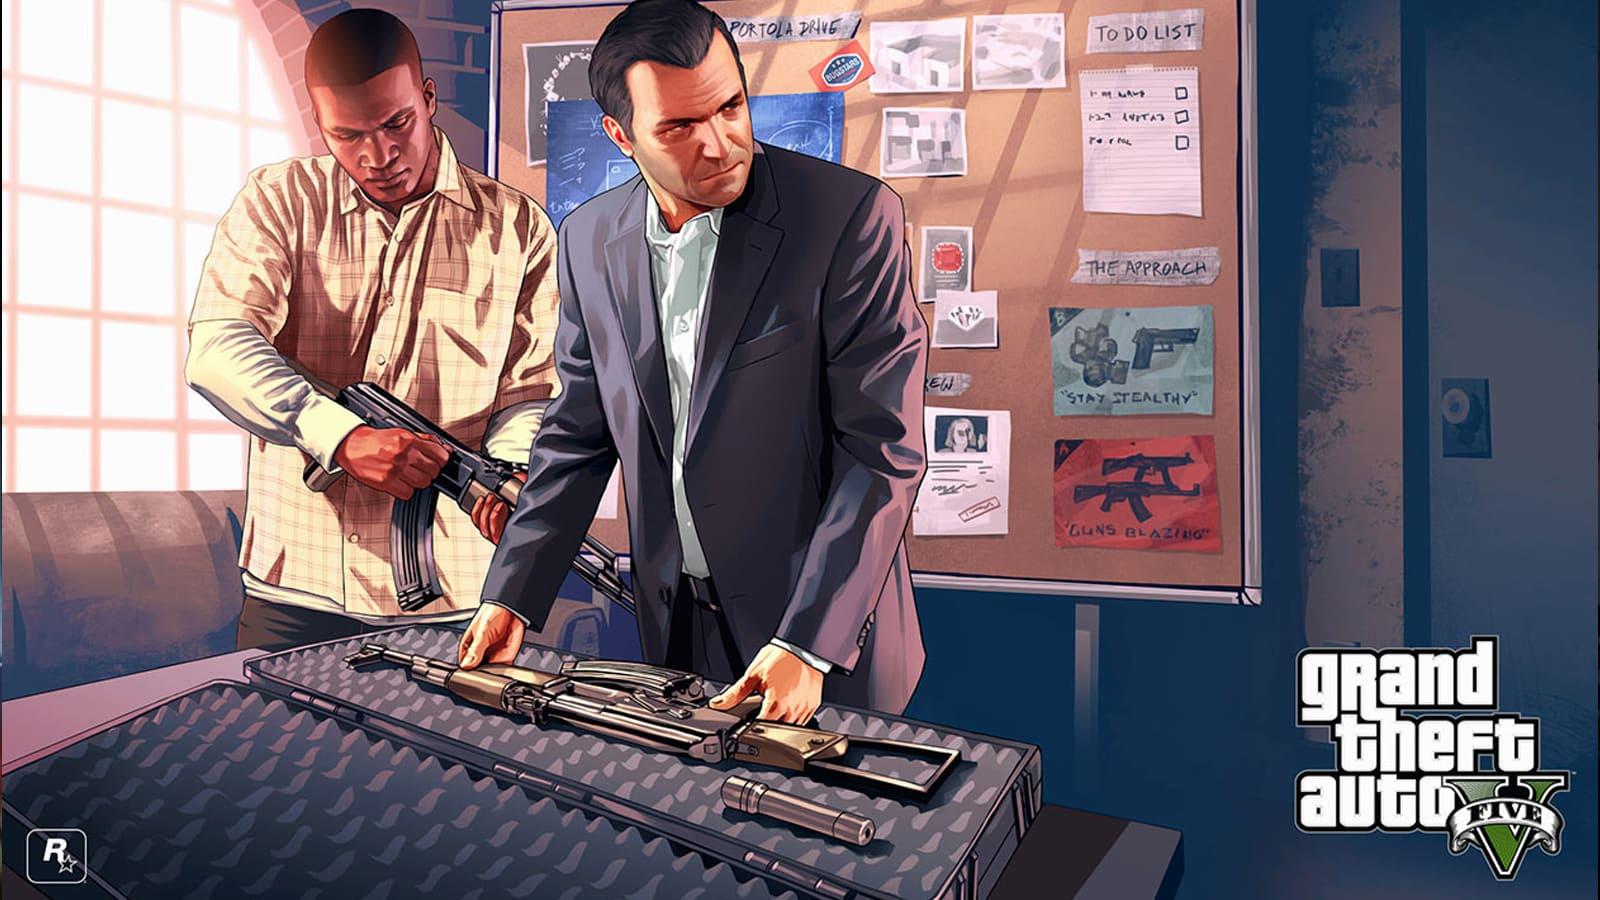 Don't expect to transfer your GTA 5 progress to PS5 or Xbox Series